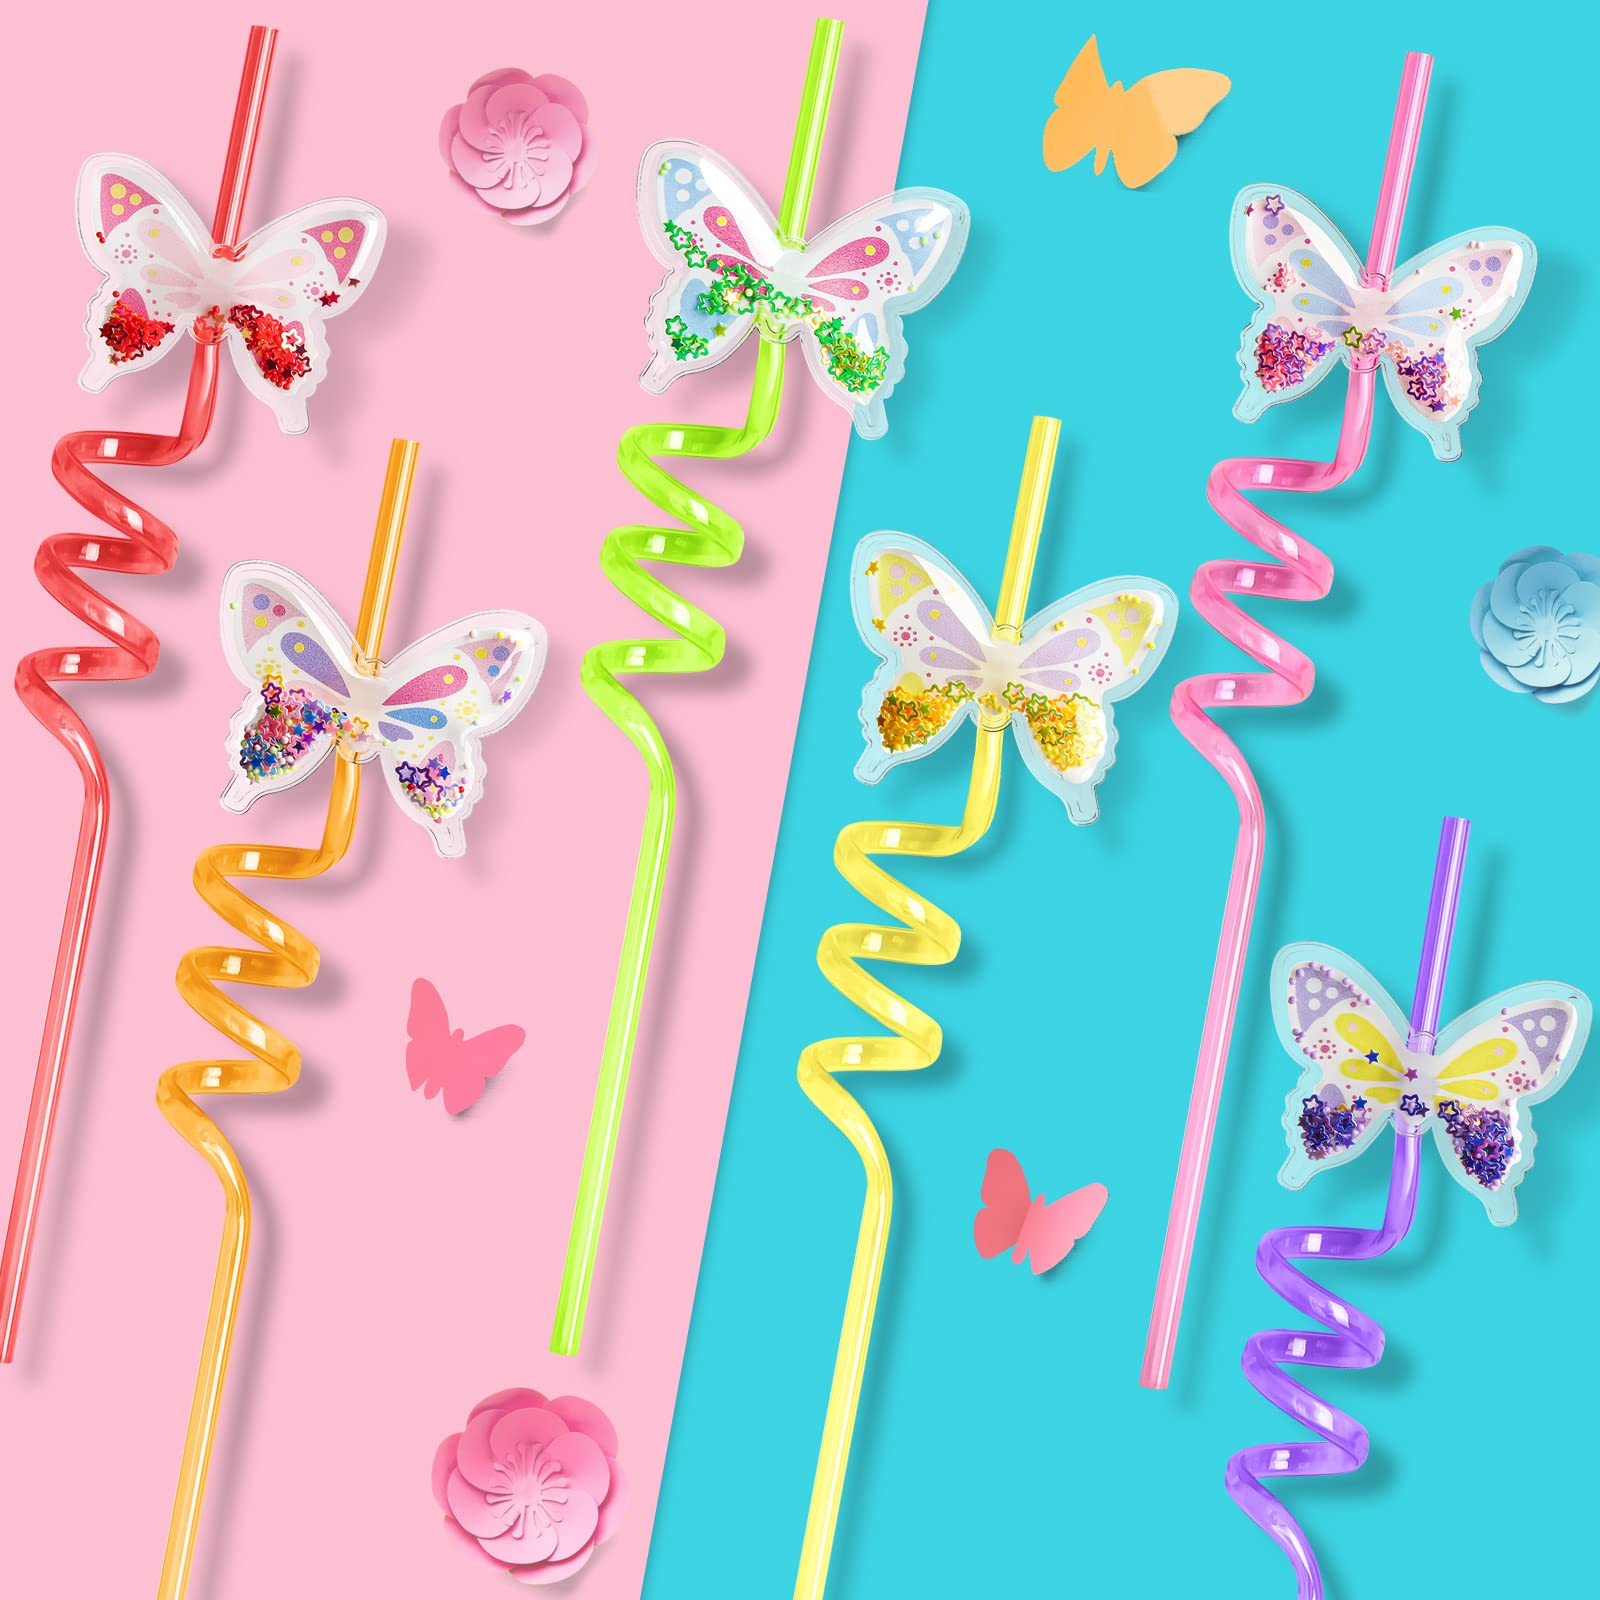 AFZMON Butterfly Drinking Straws 24 PCS Butterfly Party Favors with 2 Cleaning Brush Birthday Party Supplies Long Plastic Straw Girls Party Decorations